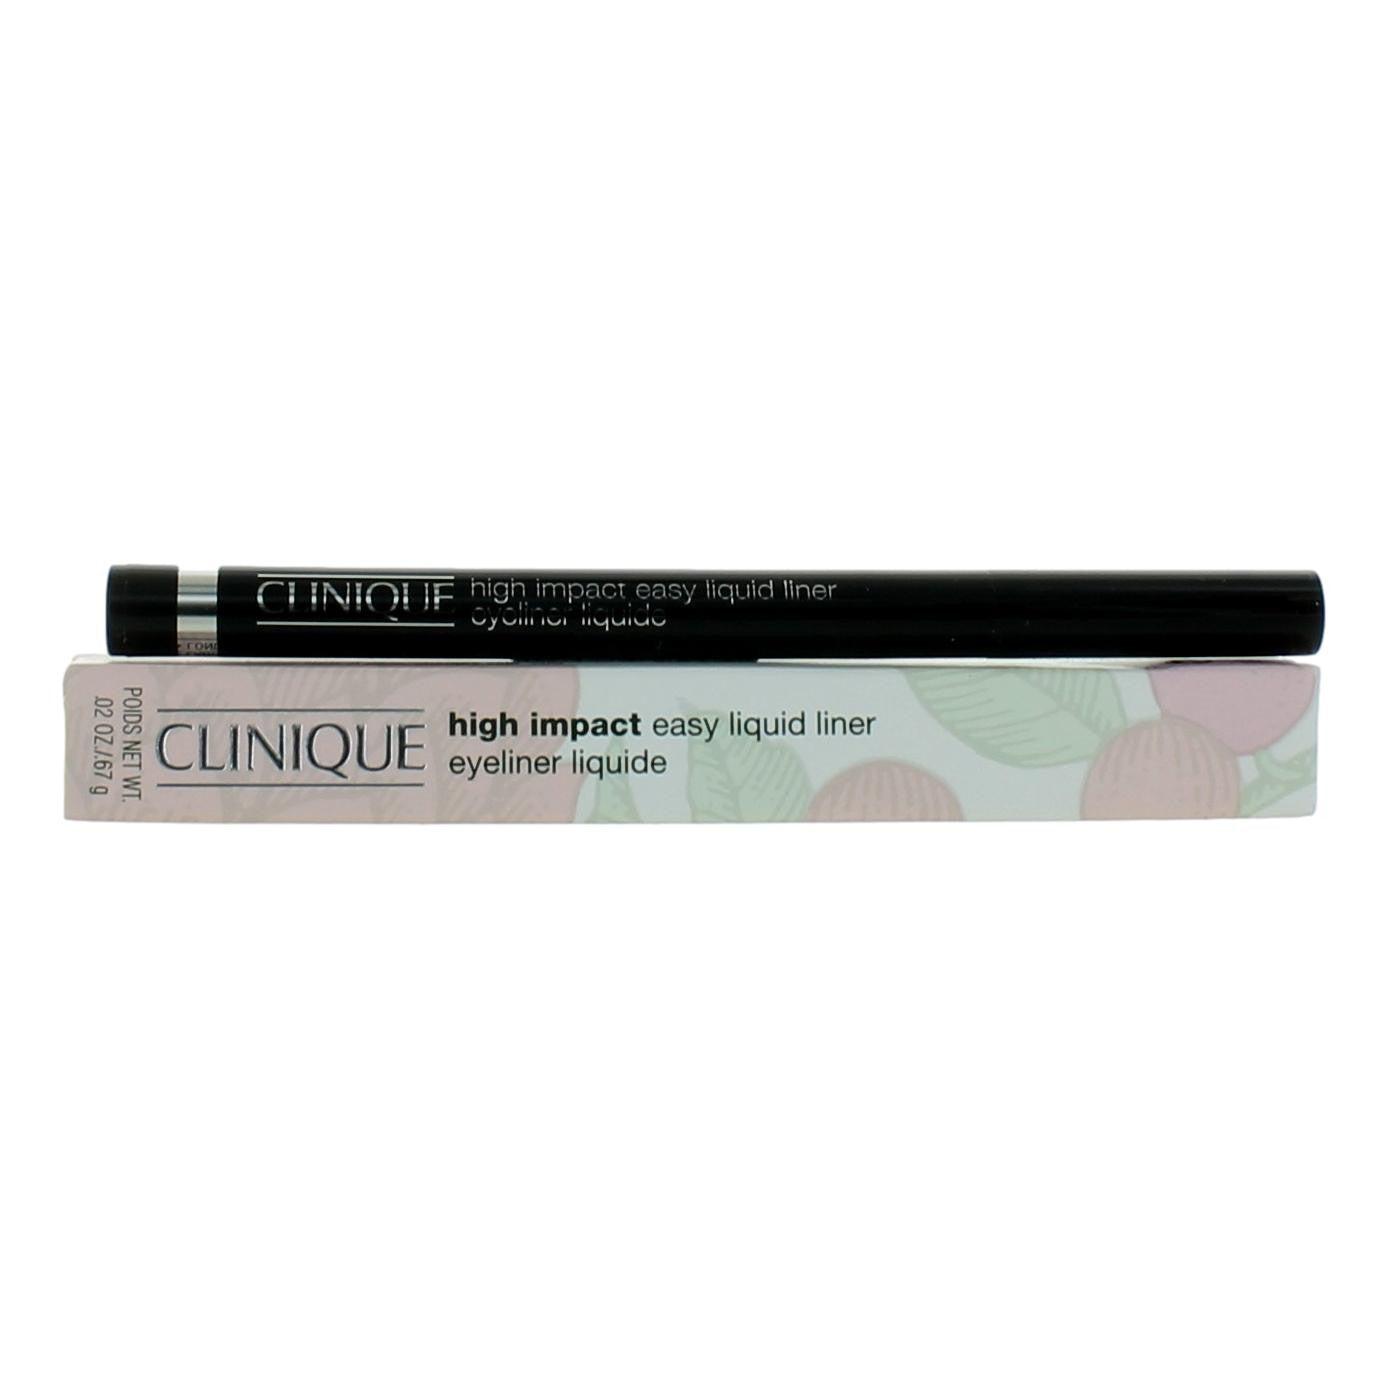 Clinique High Impact Easy Liquid Liner by Clinique, .02oz Eyeliner - 01 Black